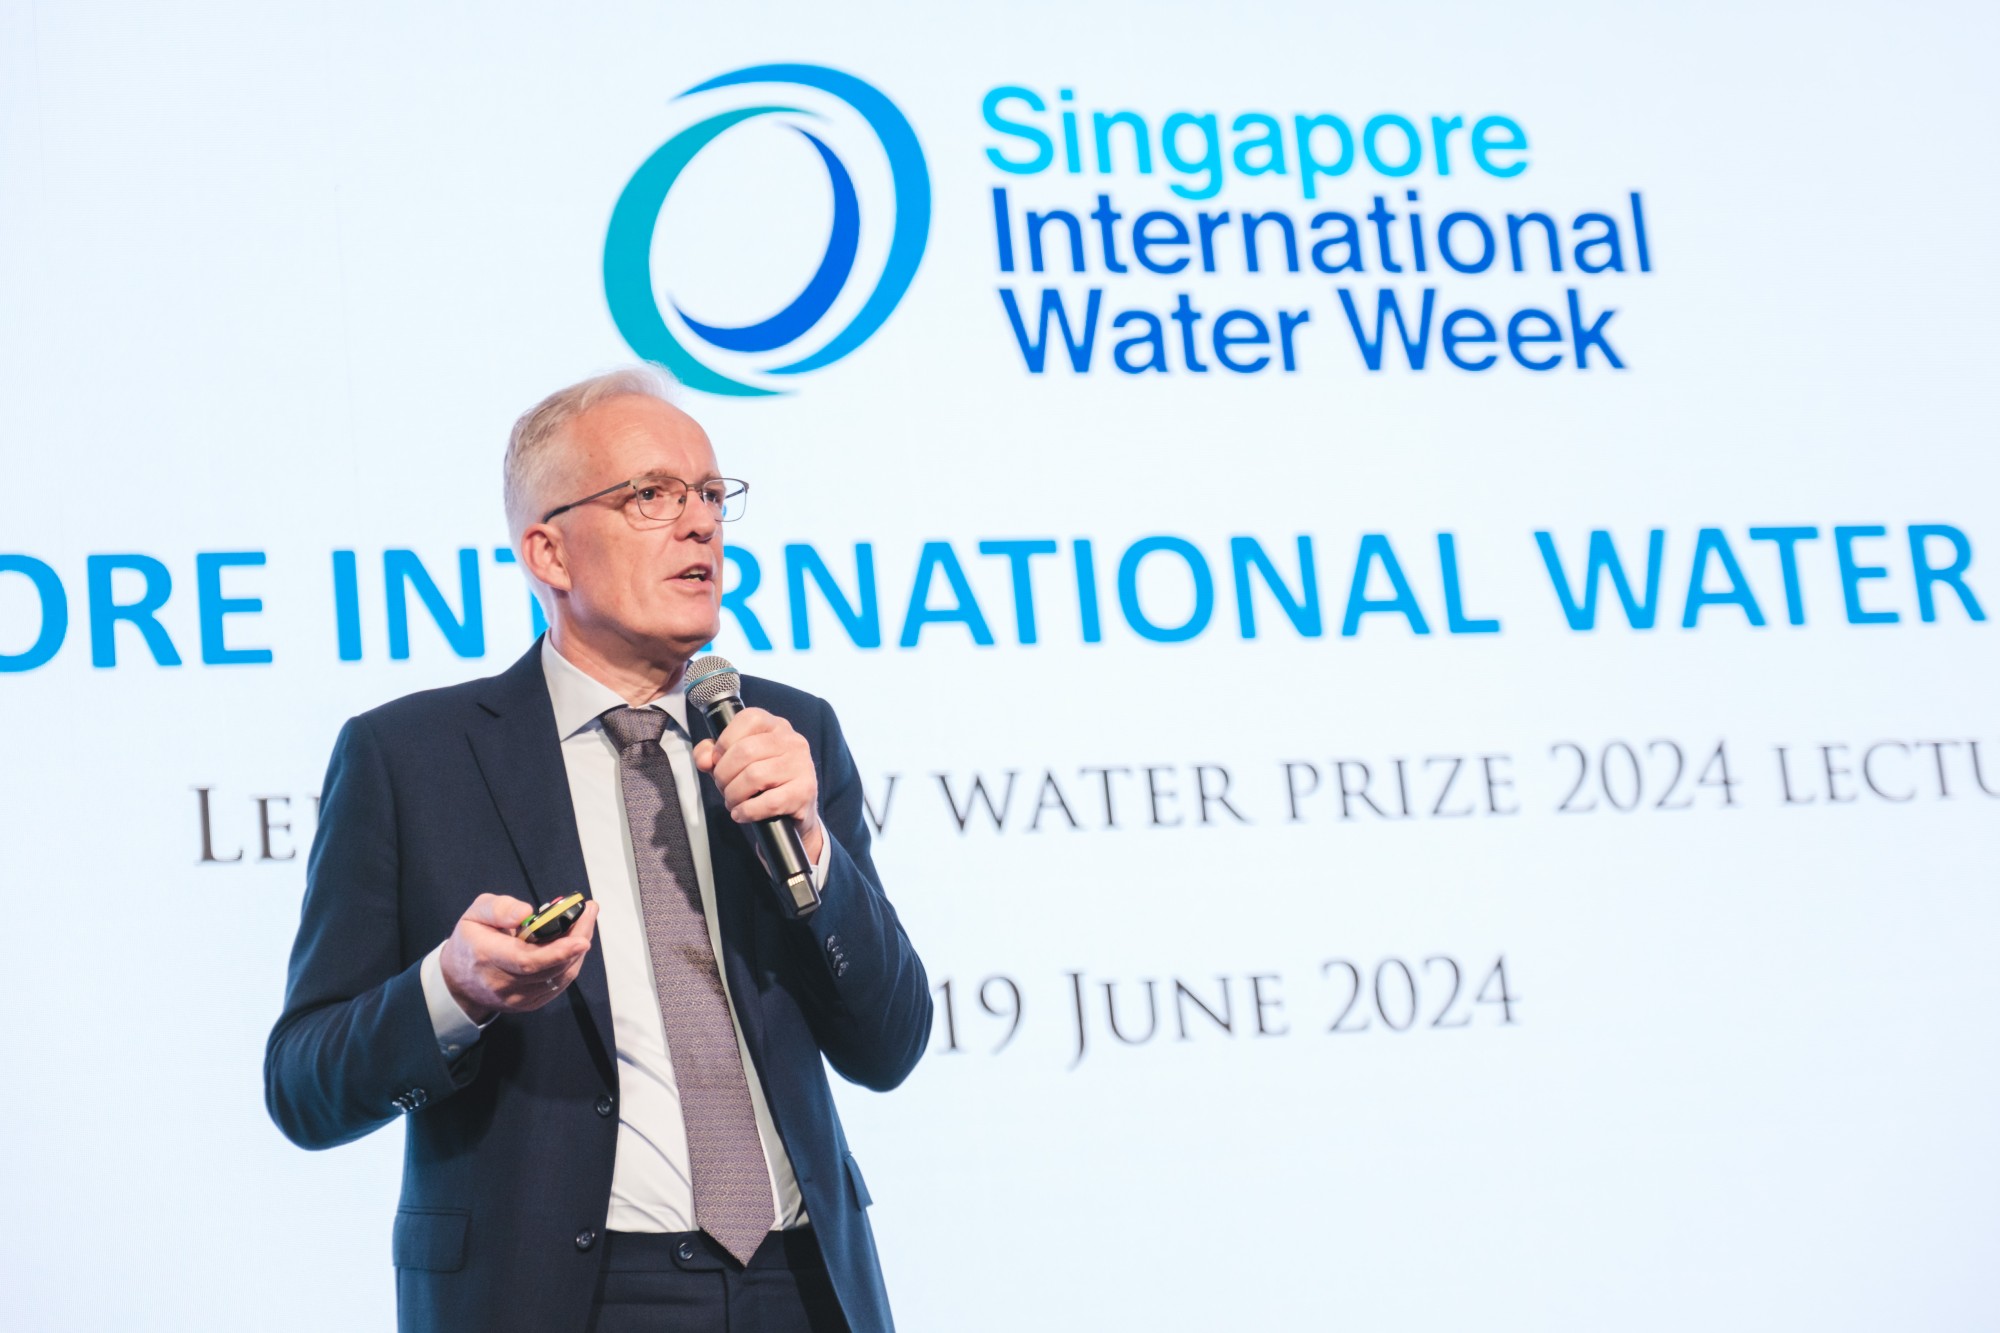 Lee Kuan Yew Water Prize 2024 Lecture